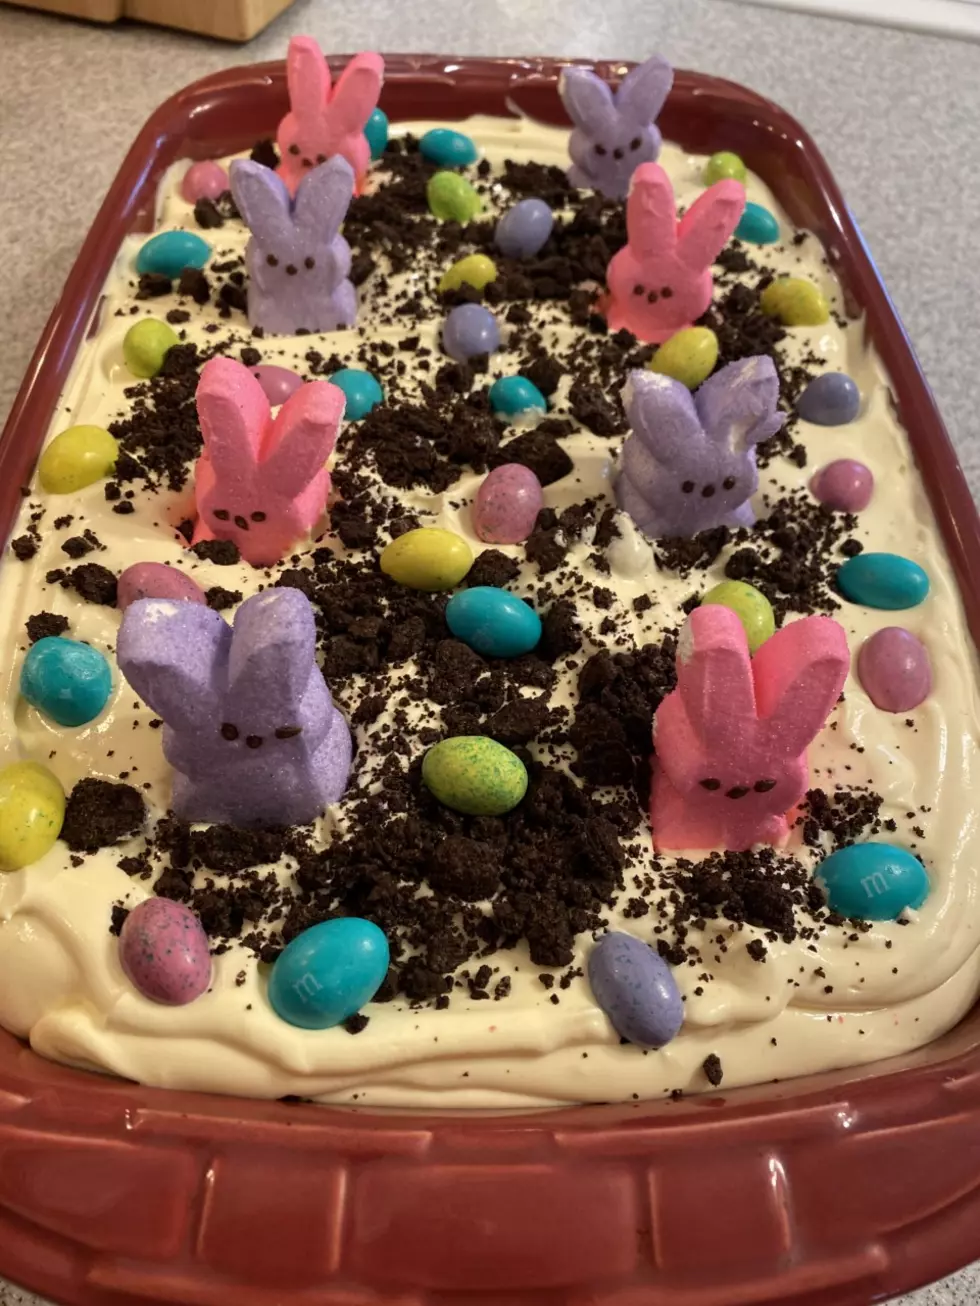 How to Make Chris Rollins’ Easter Dirt Cake